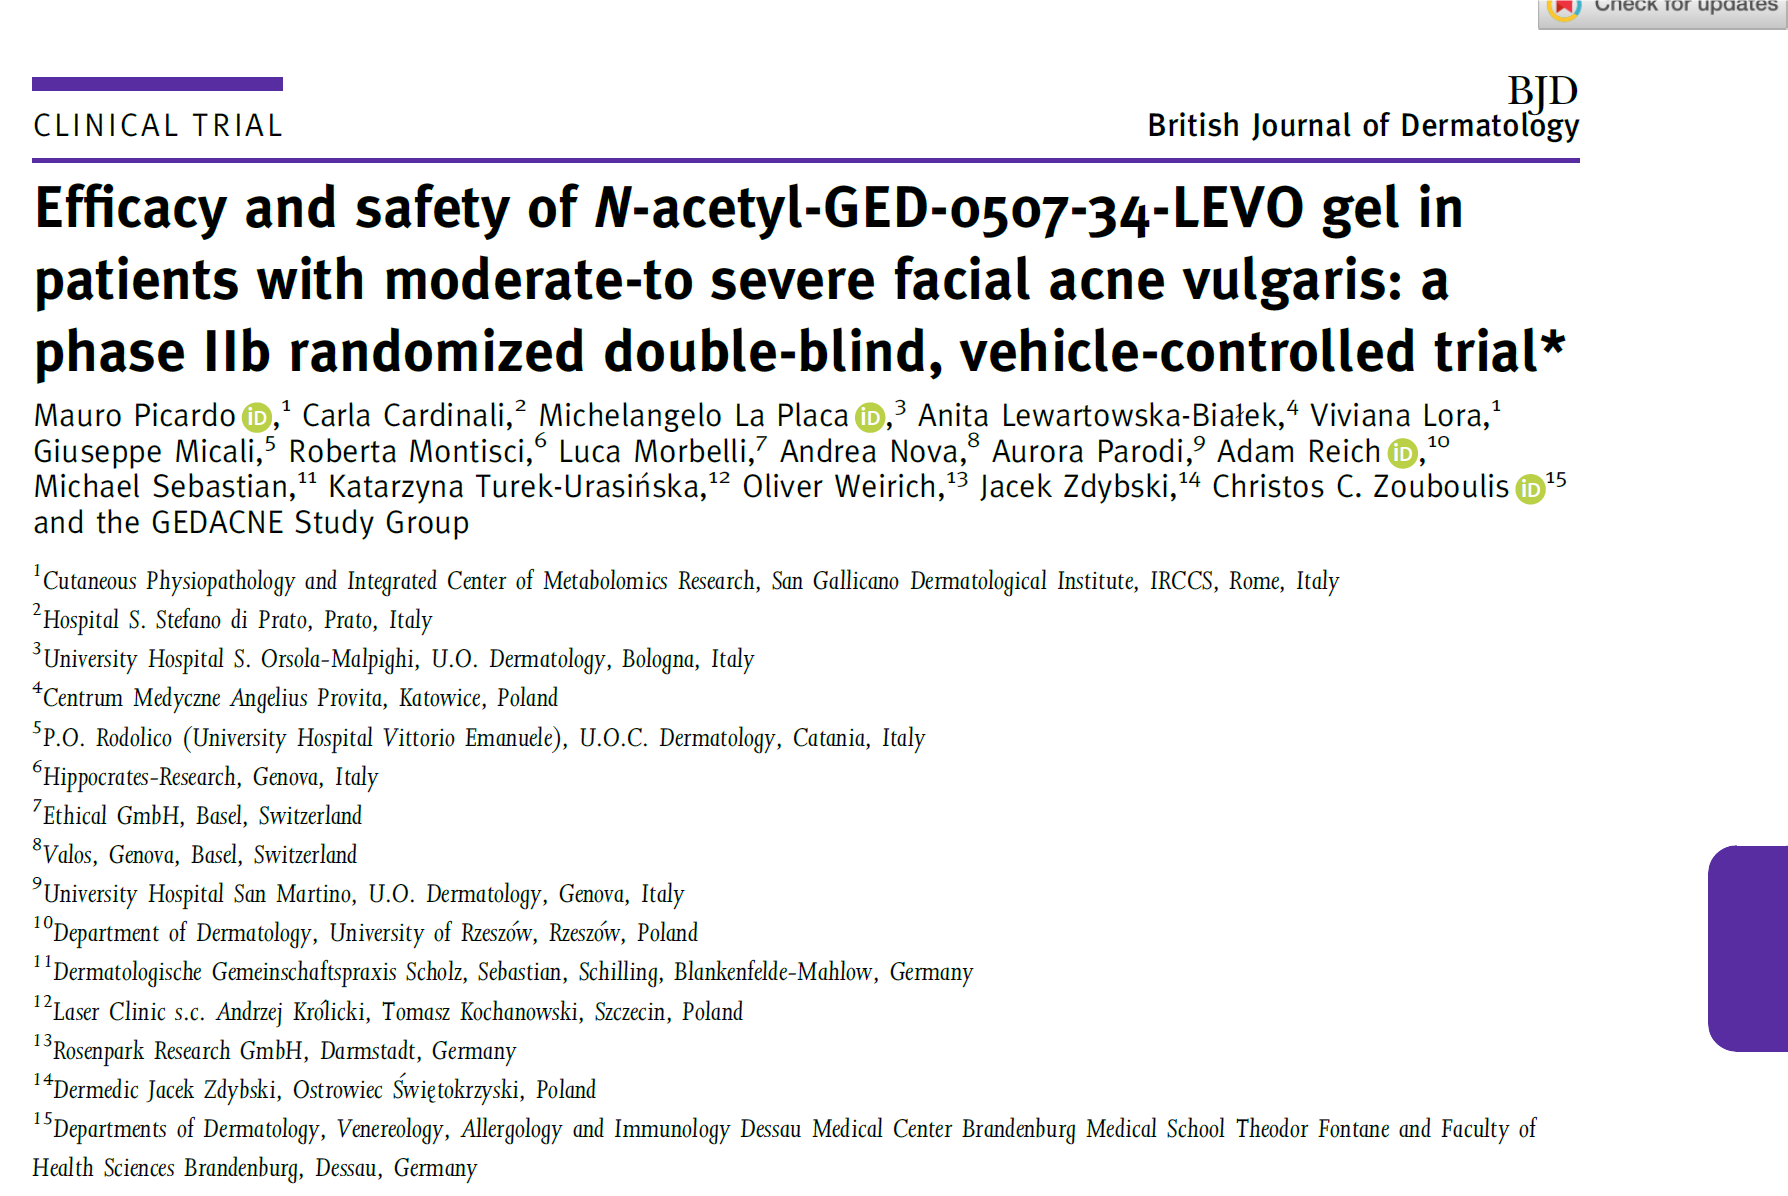 Efficacy and safety of N-acetyl-GED-0507-34-LEVO gel in patients with moderate-to severe facial acne vulgaris: a phase IIb randomized double-blind, vehicle-controlled trial